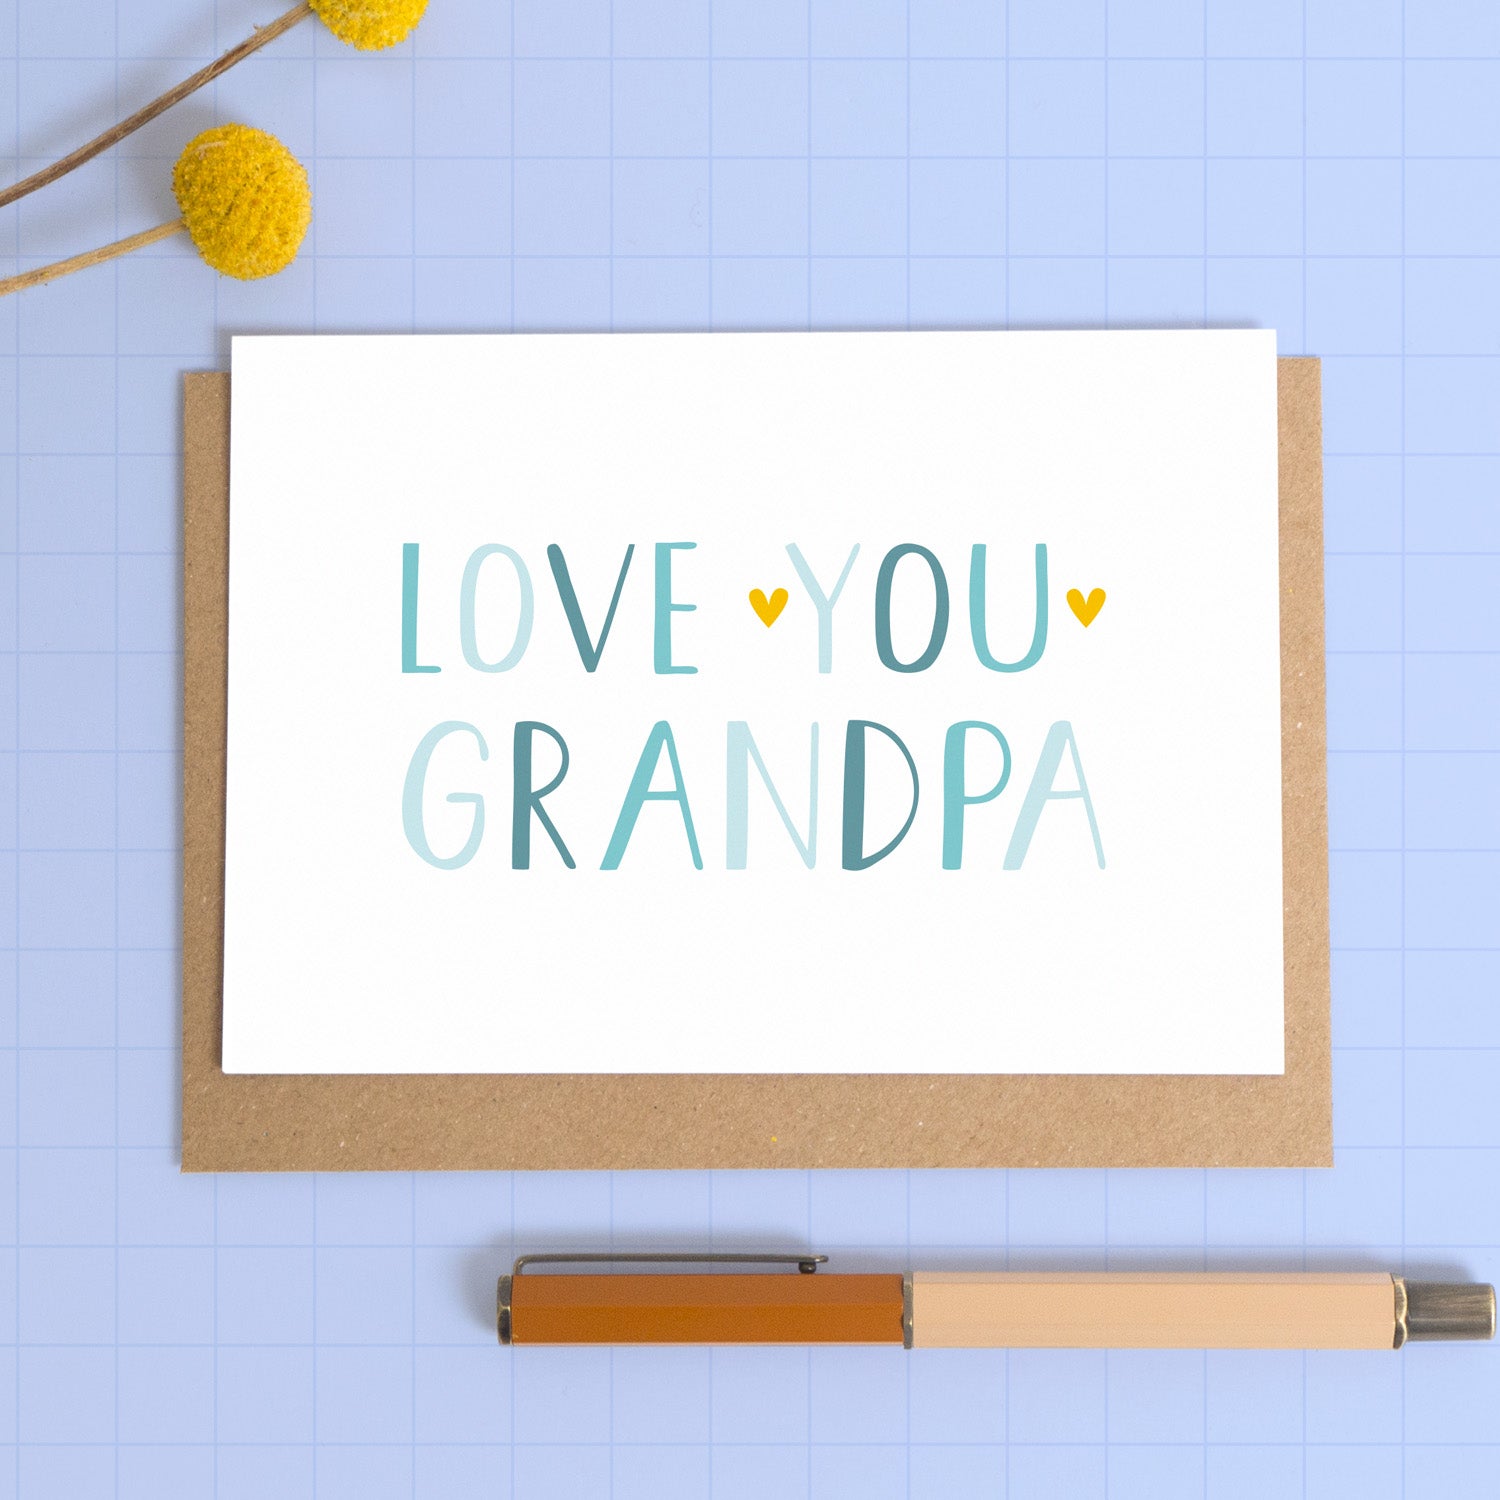 This image shows a love you grandpa card in landscape format photographed on a kraft brown envelope with a blue background.